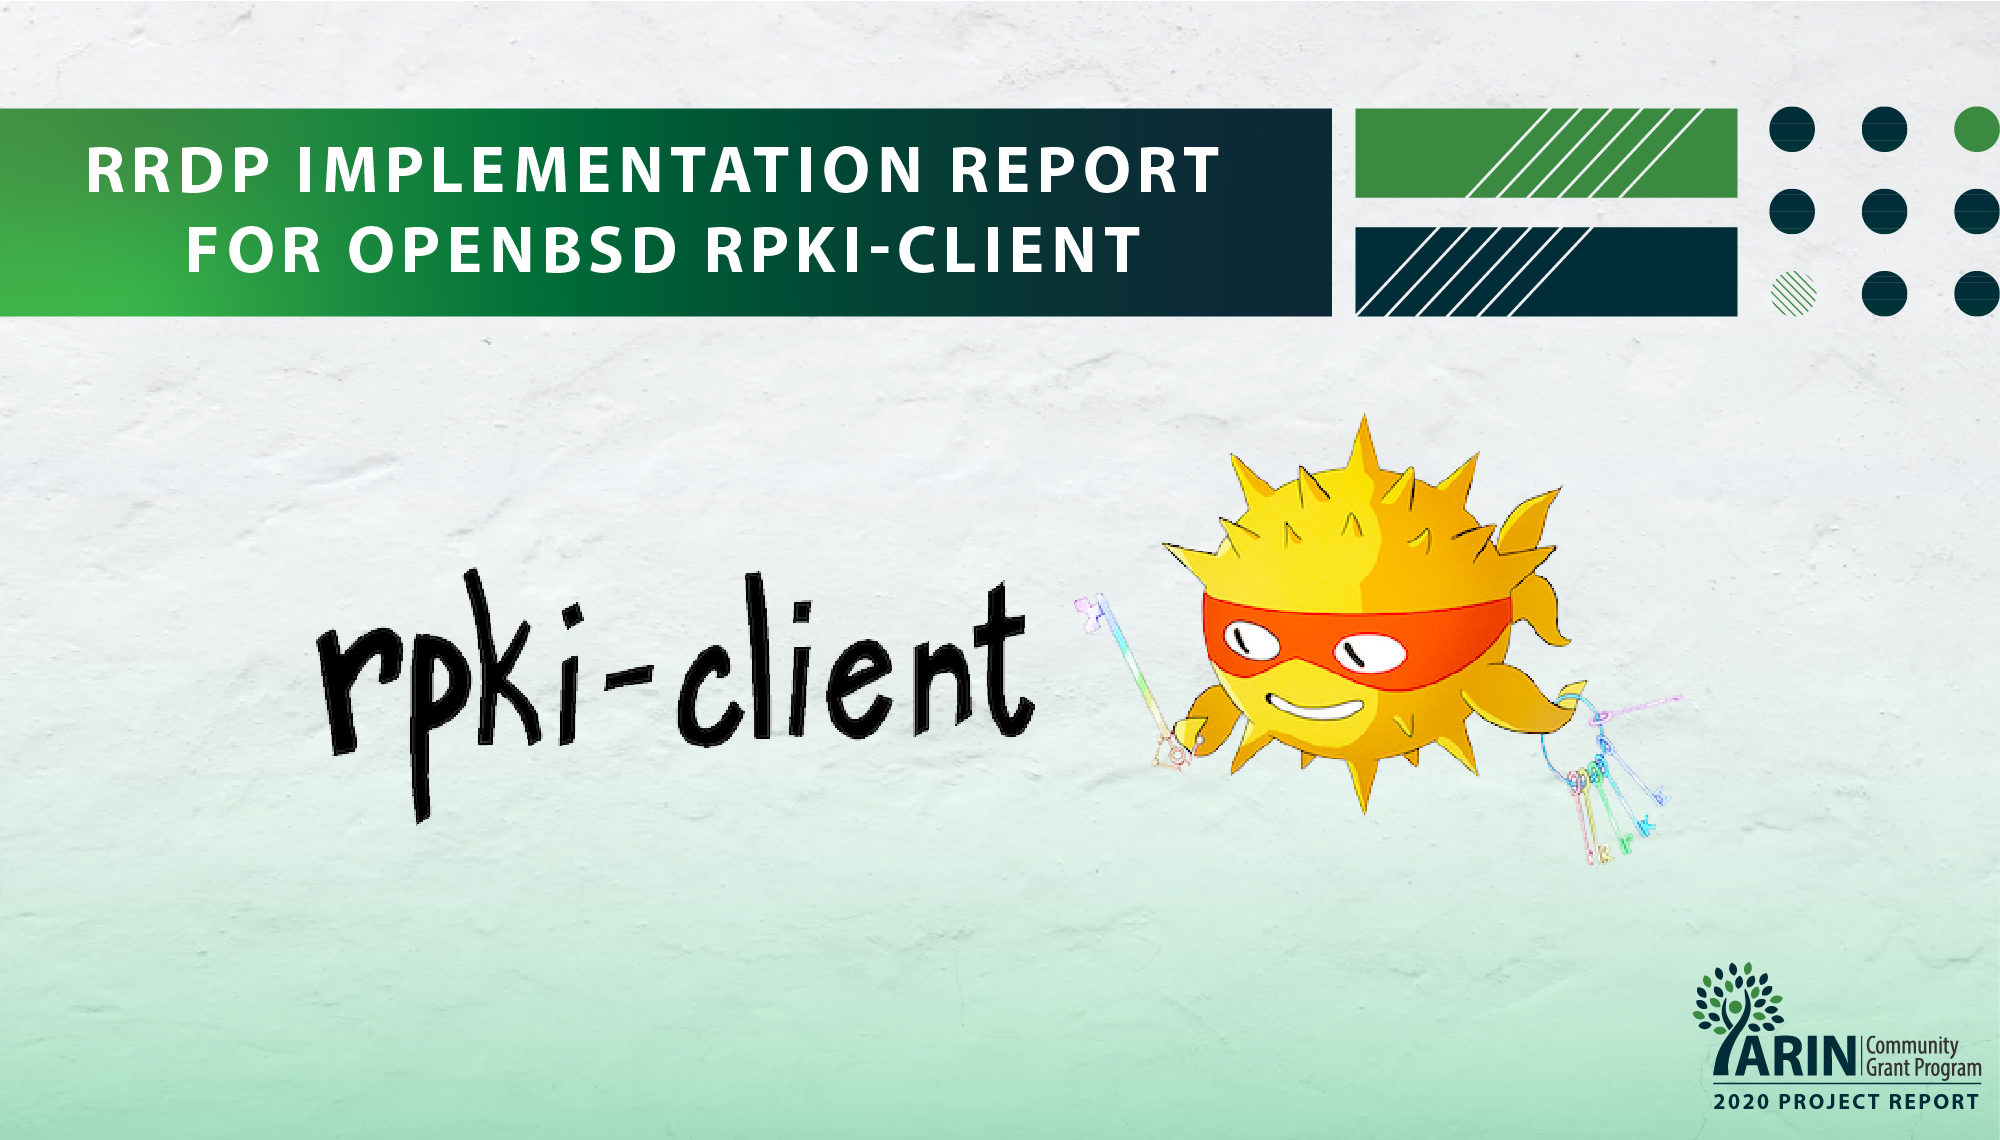 RRDP Implementation Report for OpenBSD rpki-client